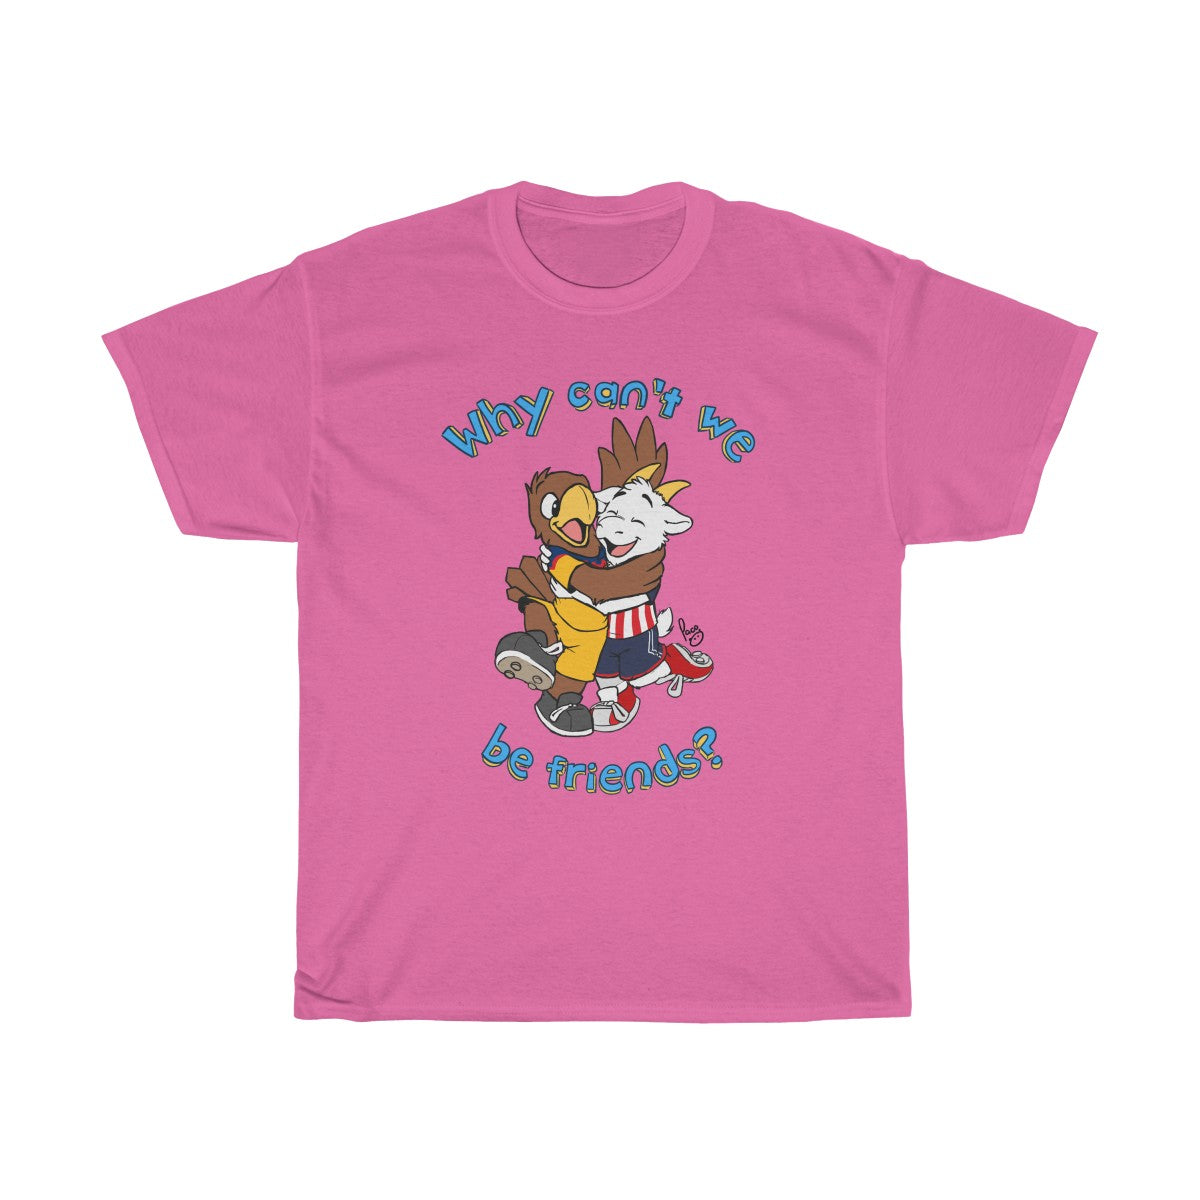 Why Can't we be Friends? - T-Shirt T-Shirt Paco Panda Pink S 